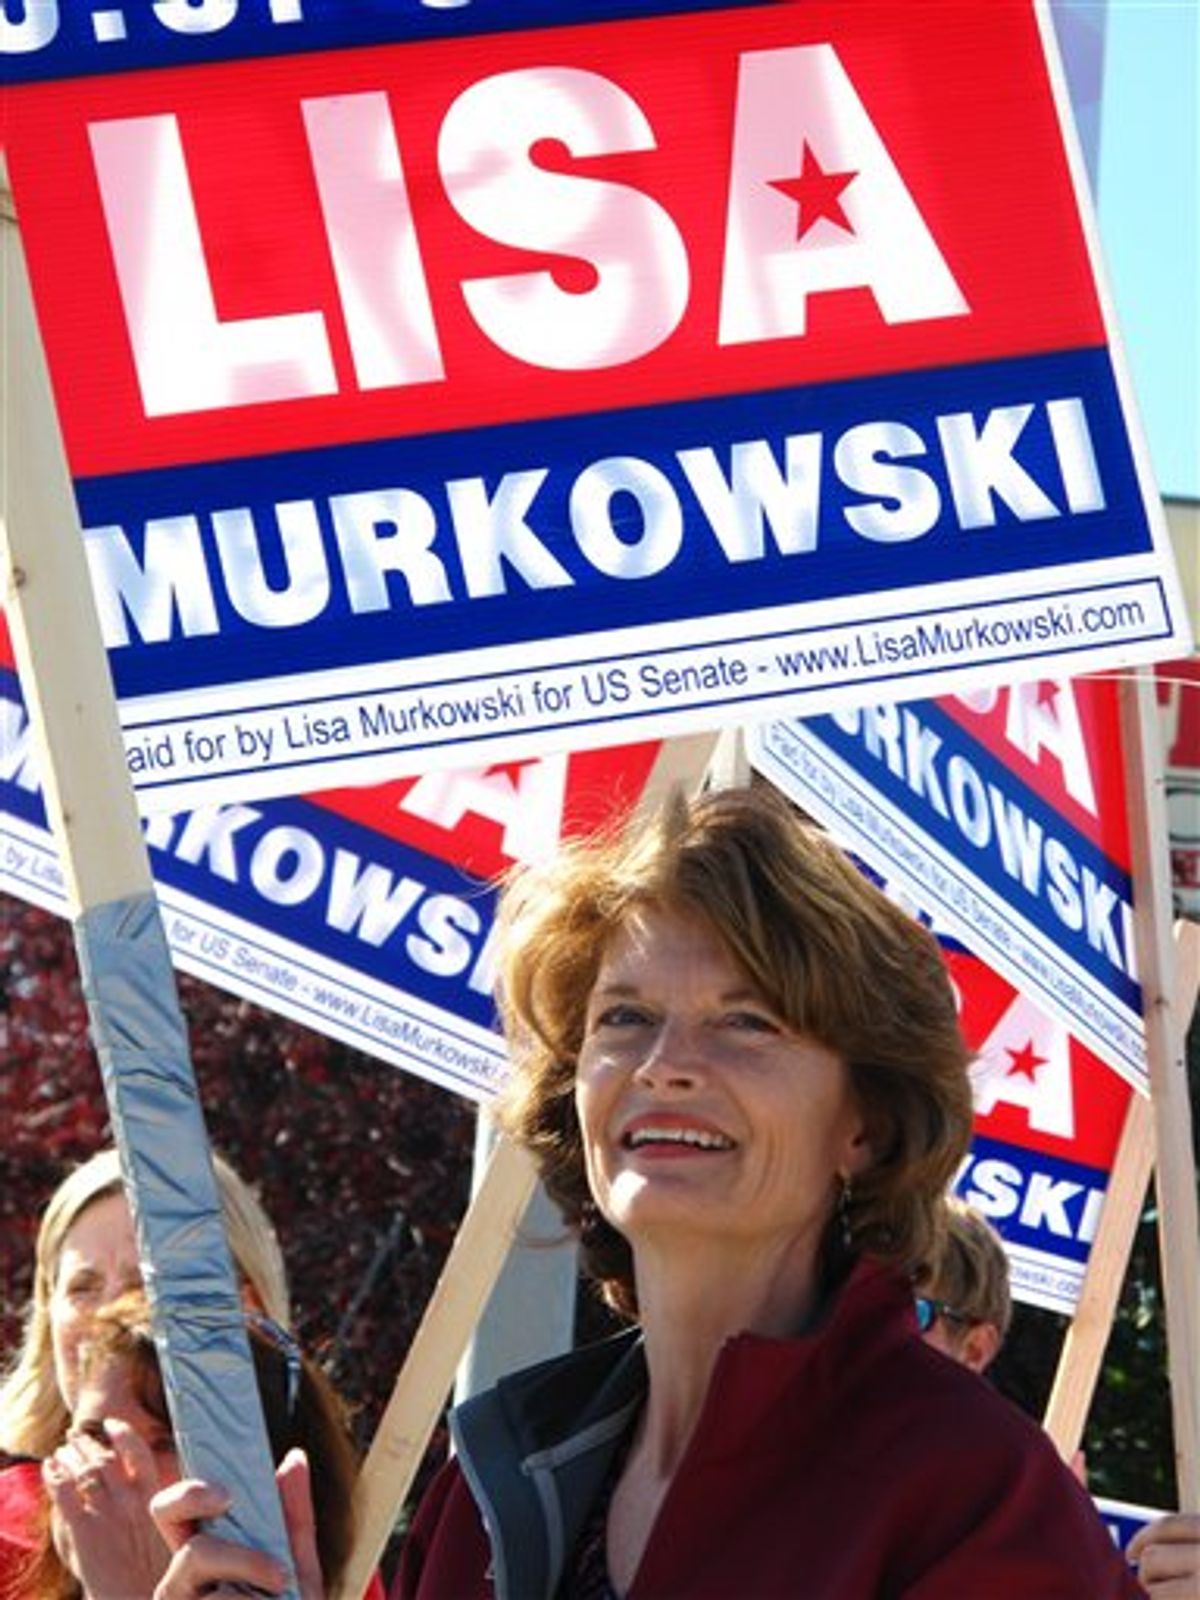 U.S. Sen. Lisa Murkowski, R-Alaska, right, joins volunteers to wave to motorists on Monday, Aug. 23, 2010, in Anchorage, Alaska.  Candidates are pulling no punches in their last minute push for voters in Tuesday's primary. The greatest proof of this is in the U.S. Senate race where Sarah Palin has re emerged months after first endorsing GOP challenger Joe Miller to urge Alaskans to support him and to oust Murkowski. Murkowski's not shying away, running a new radio spot of her own, called "Truth," in which she uses audio from a talk show host's tirade against Miller to show Miller as distorting her record. (AP Photo/Mark Thiessen) (AP)